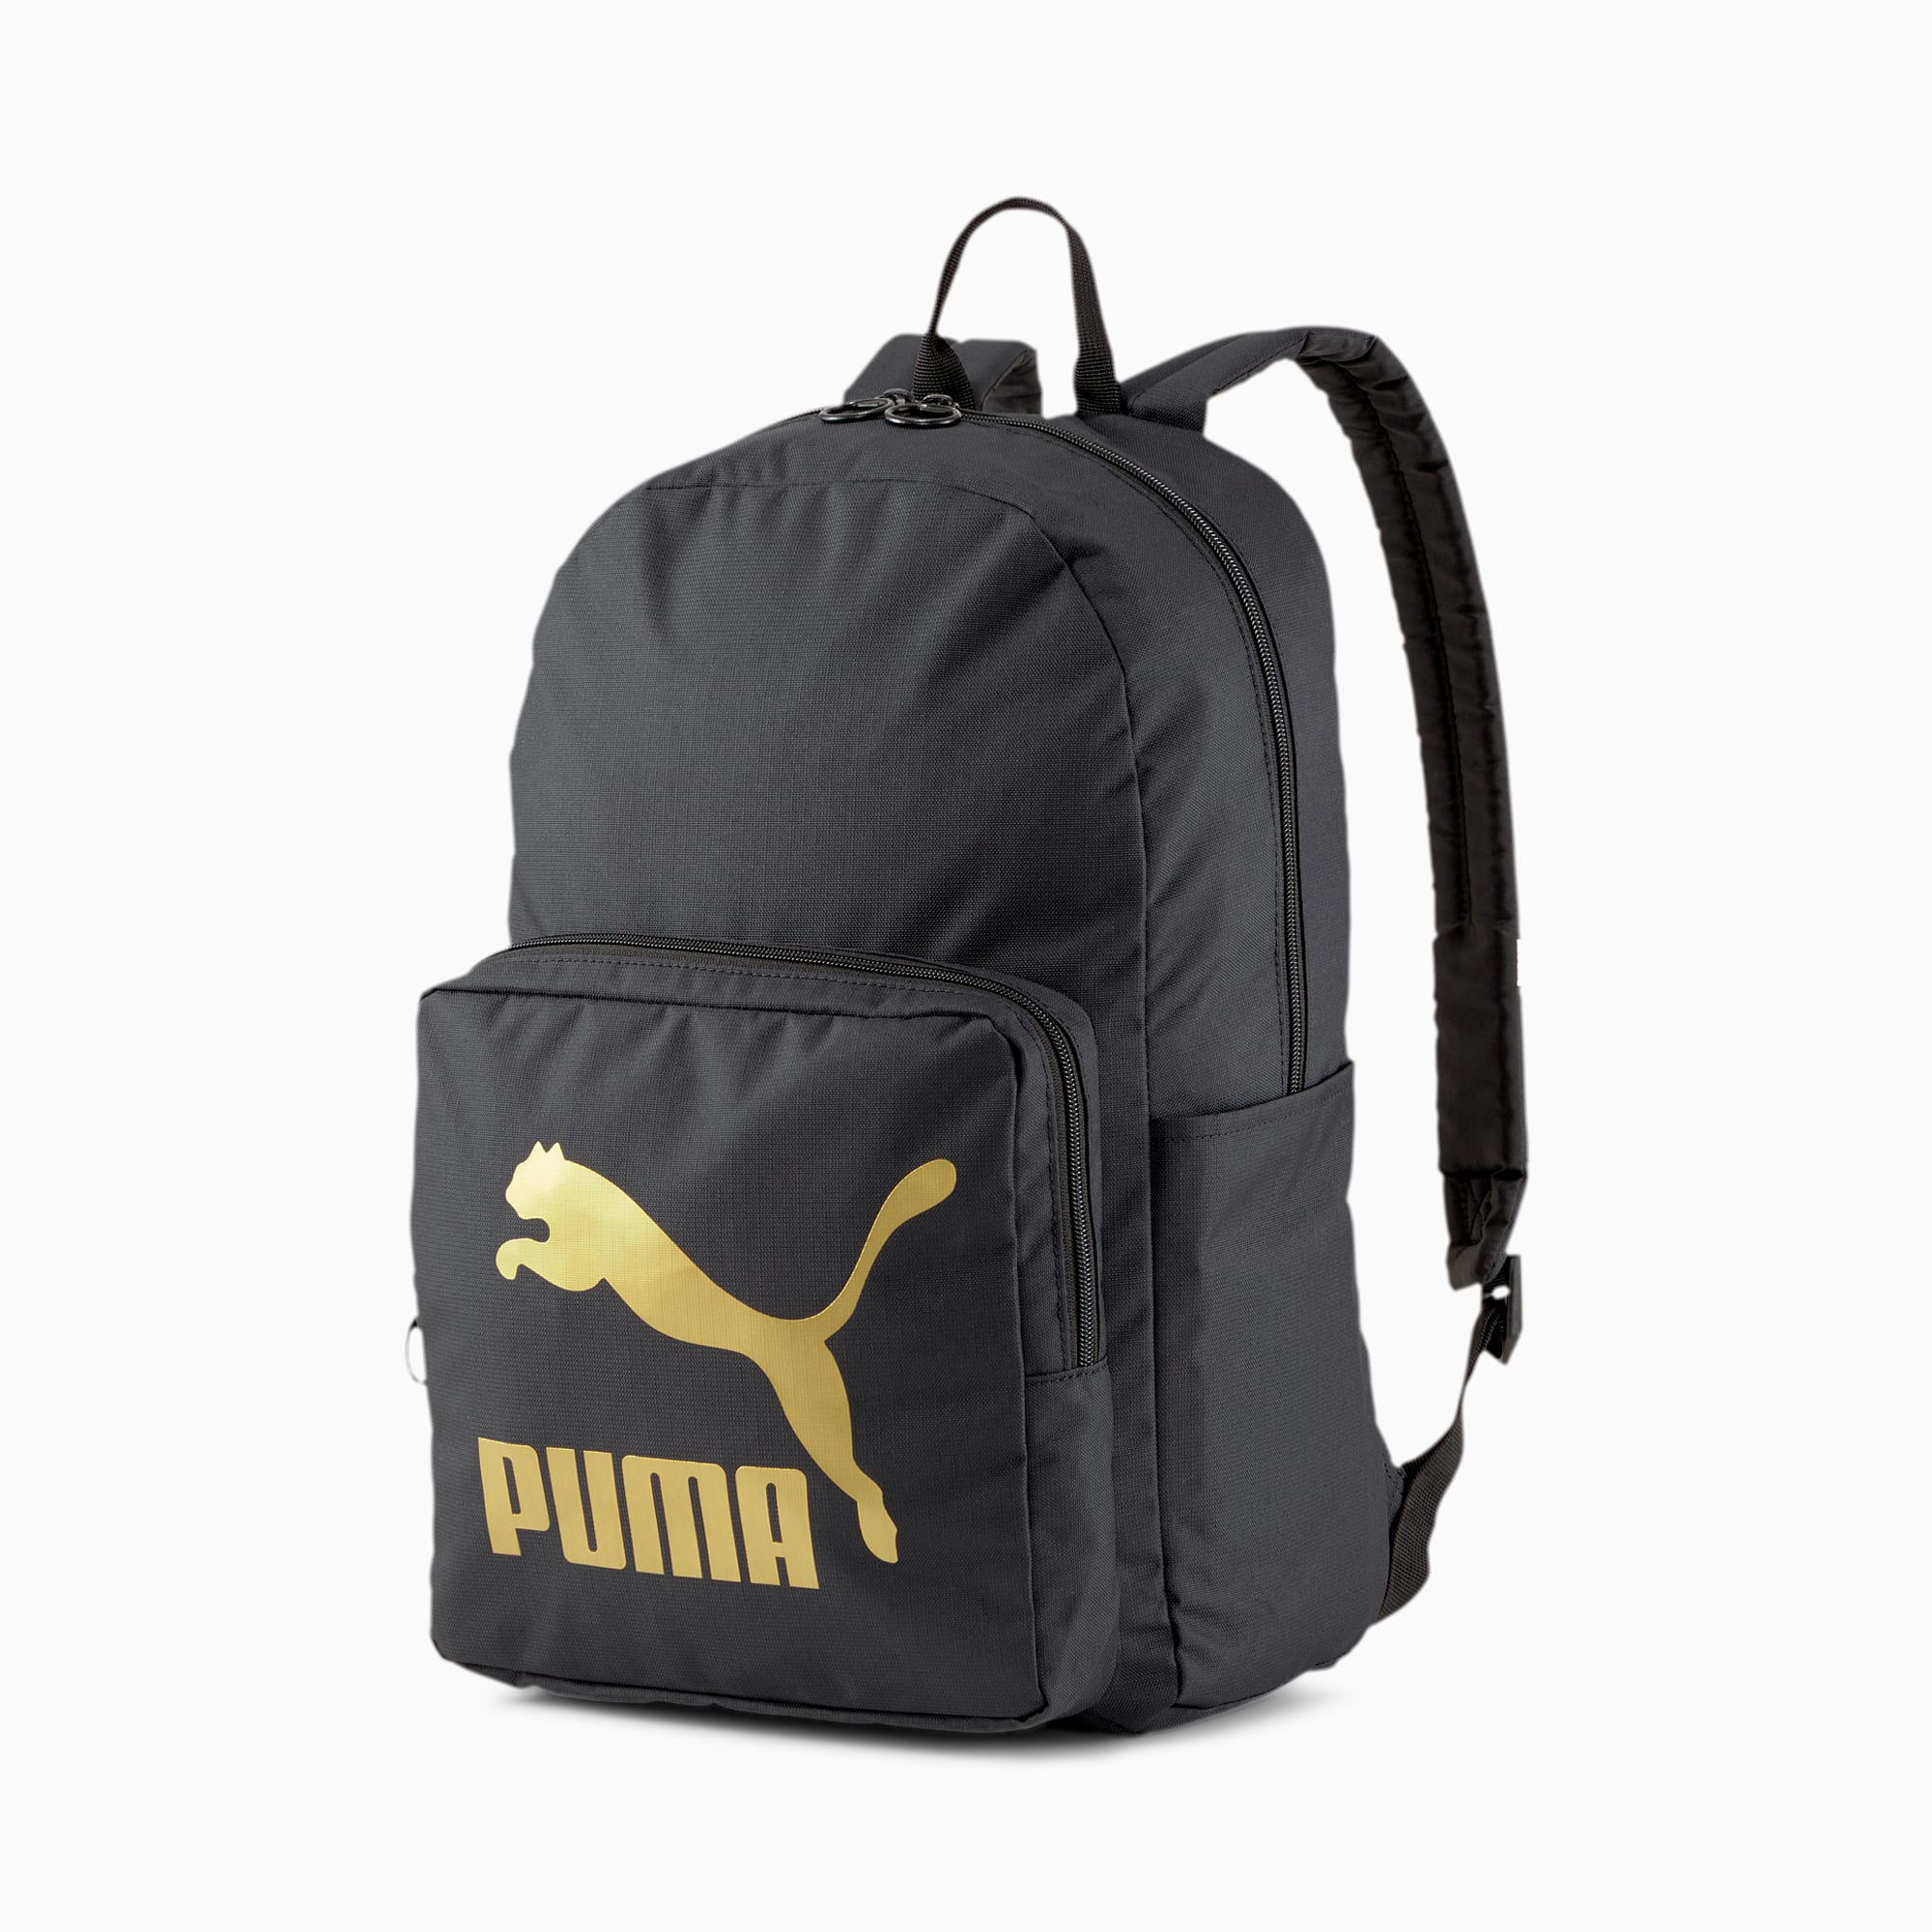 PUMA  backpack gold - ROOYAS